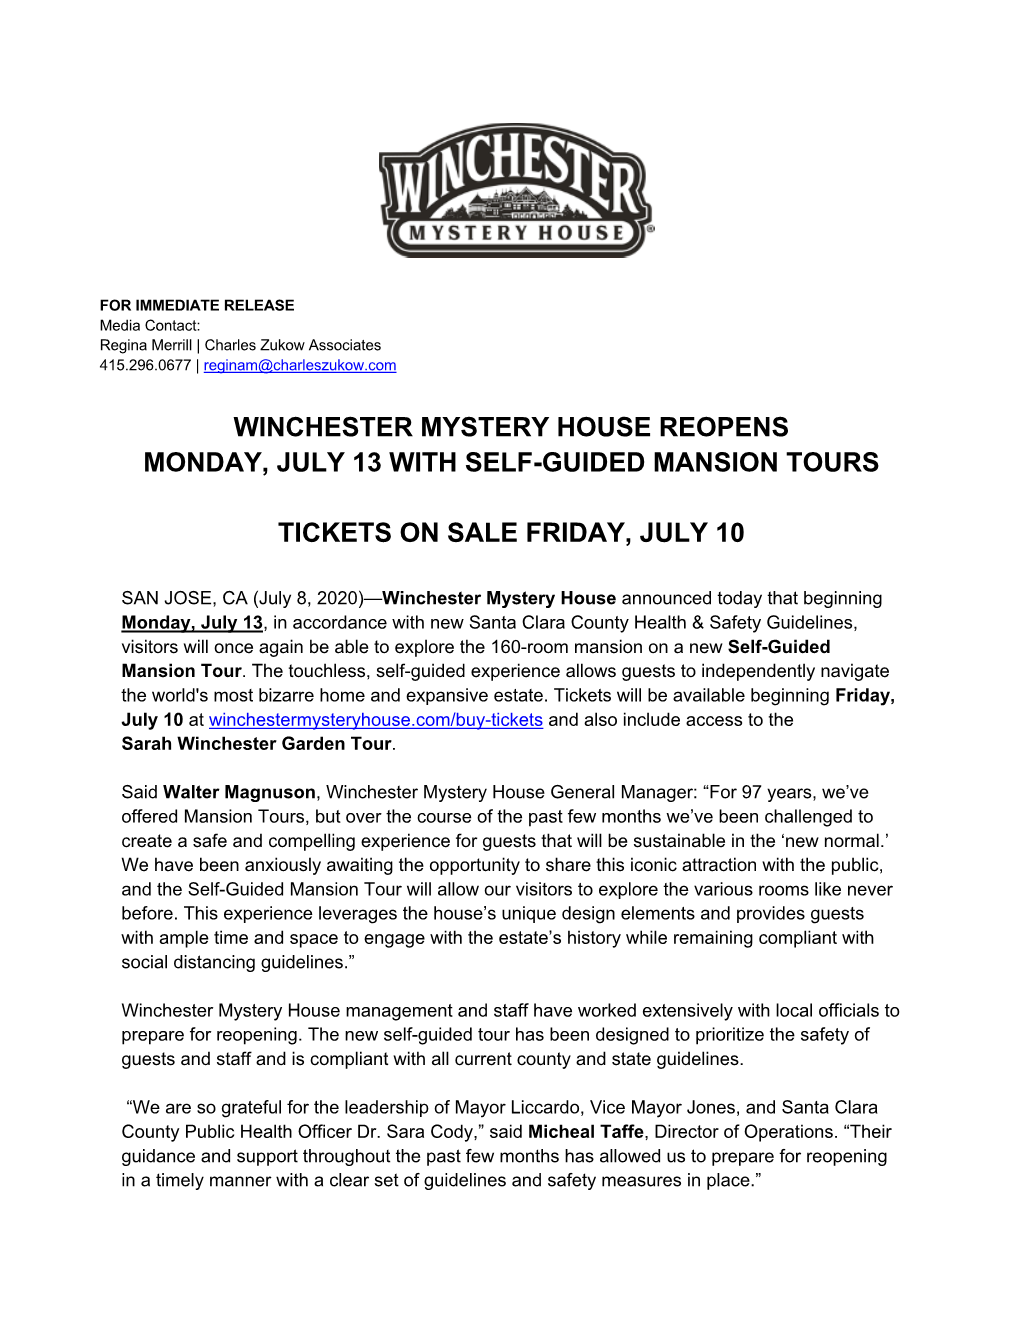 Winchester Mystery House Reopens Monday, July 13 with Self-Guided Mansion Tours